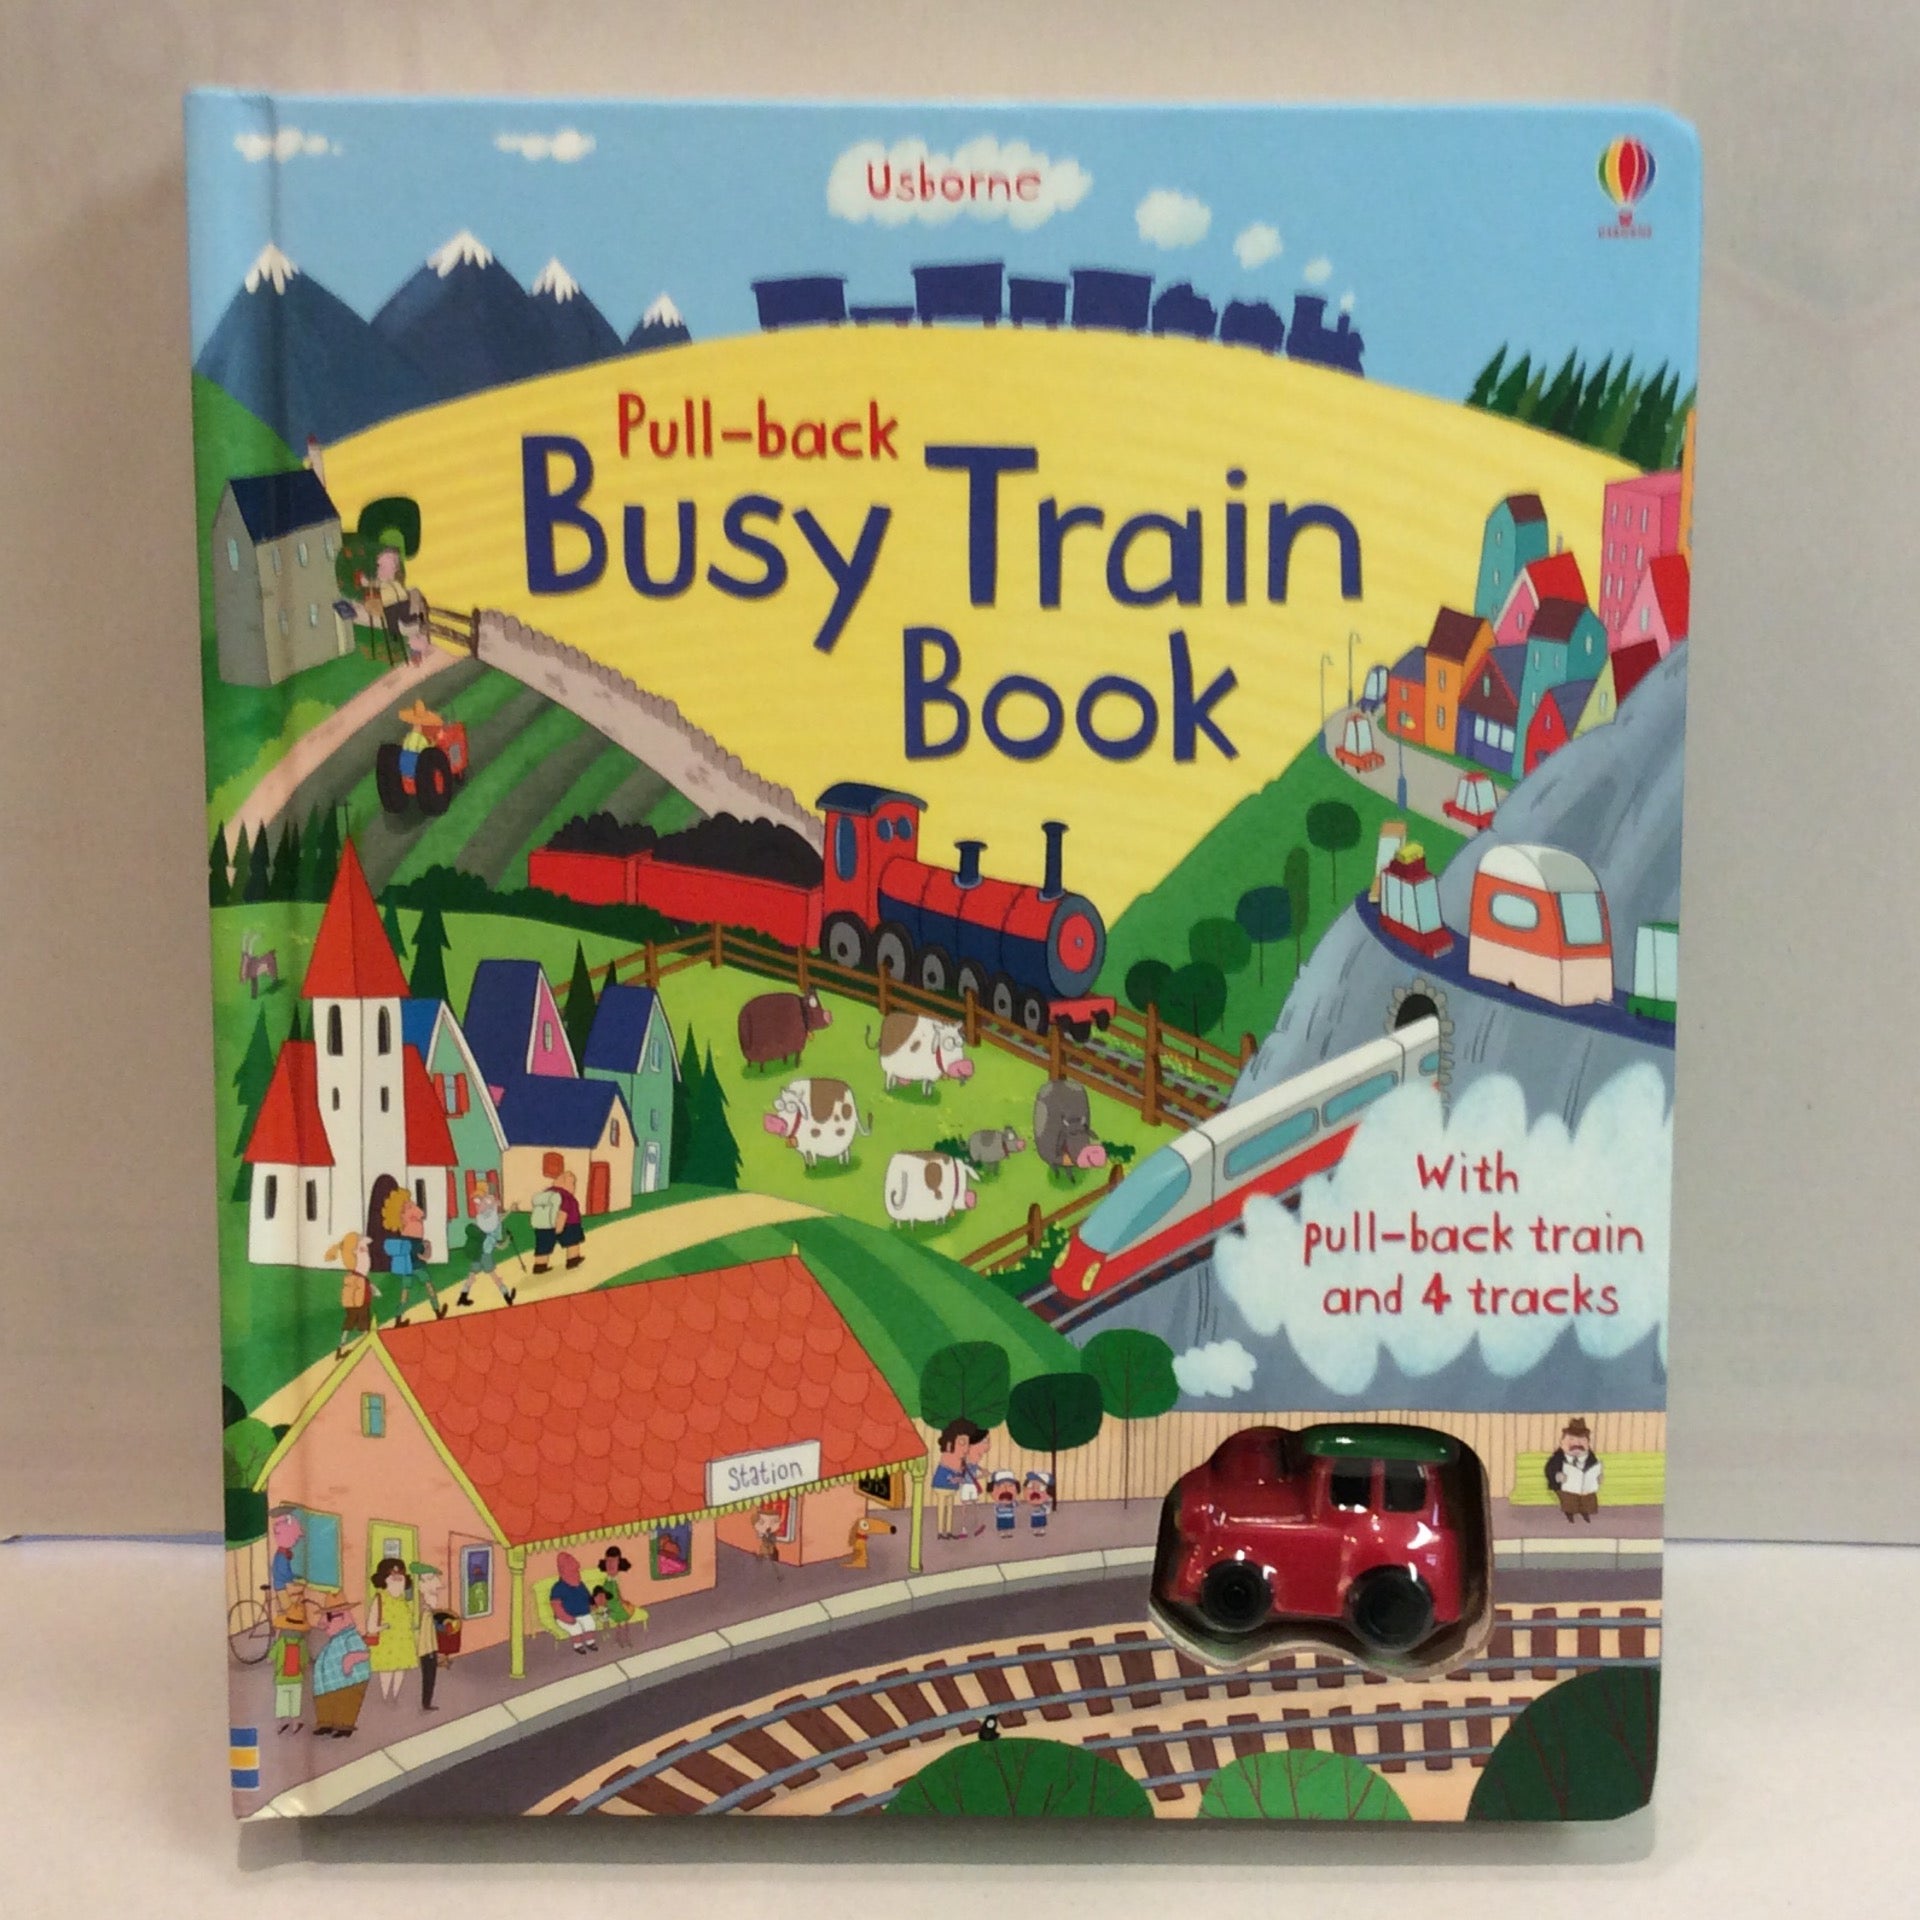 Motel,　Gift　Restaurant　Pull-back　Book　Caboose　Busy　Red　USB　Shop　Usborne　Train